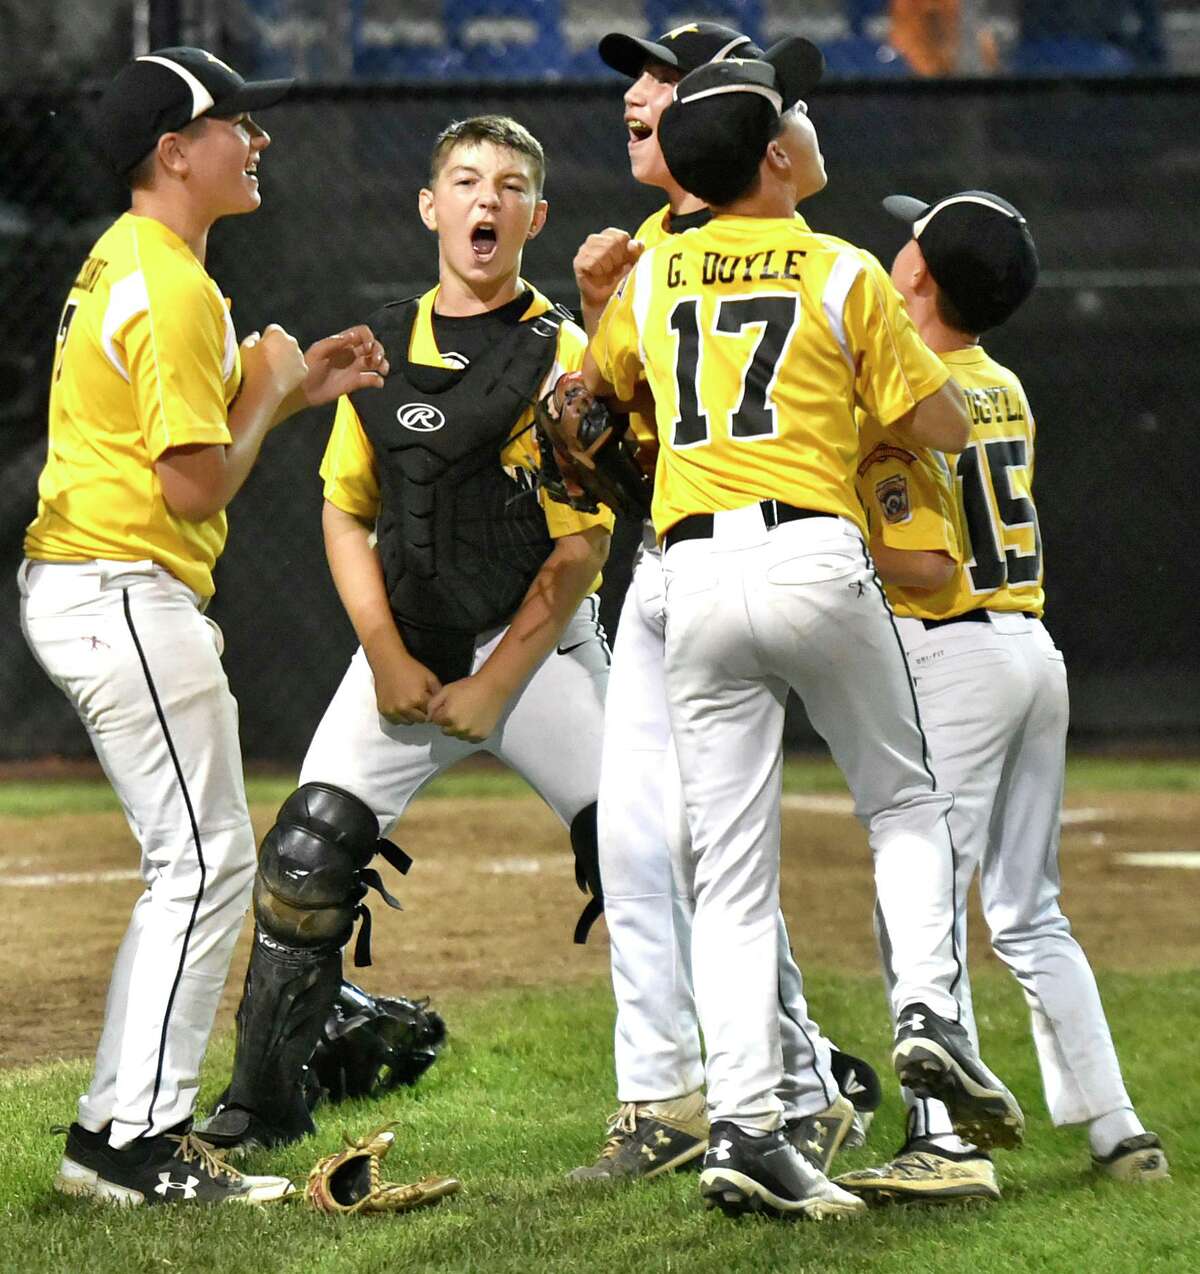 Connecticut tops Massachusetts to stay alive in Little League New